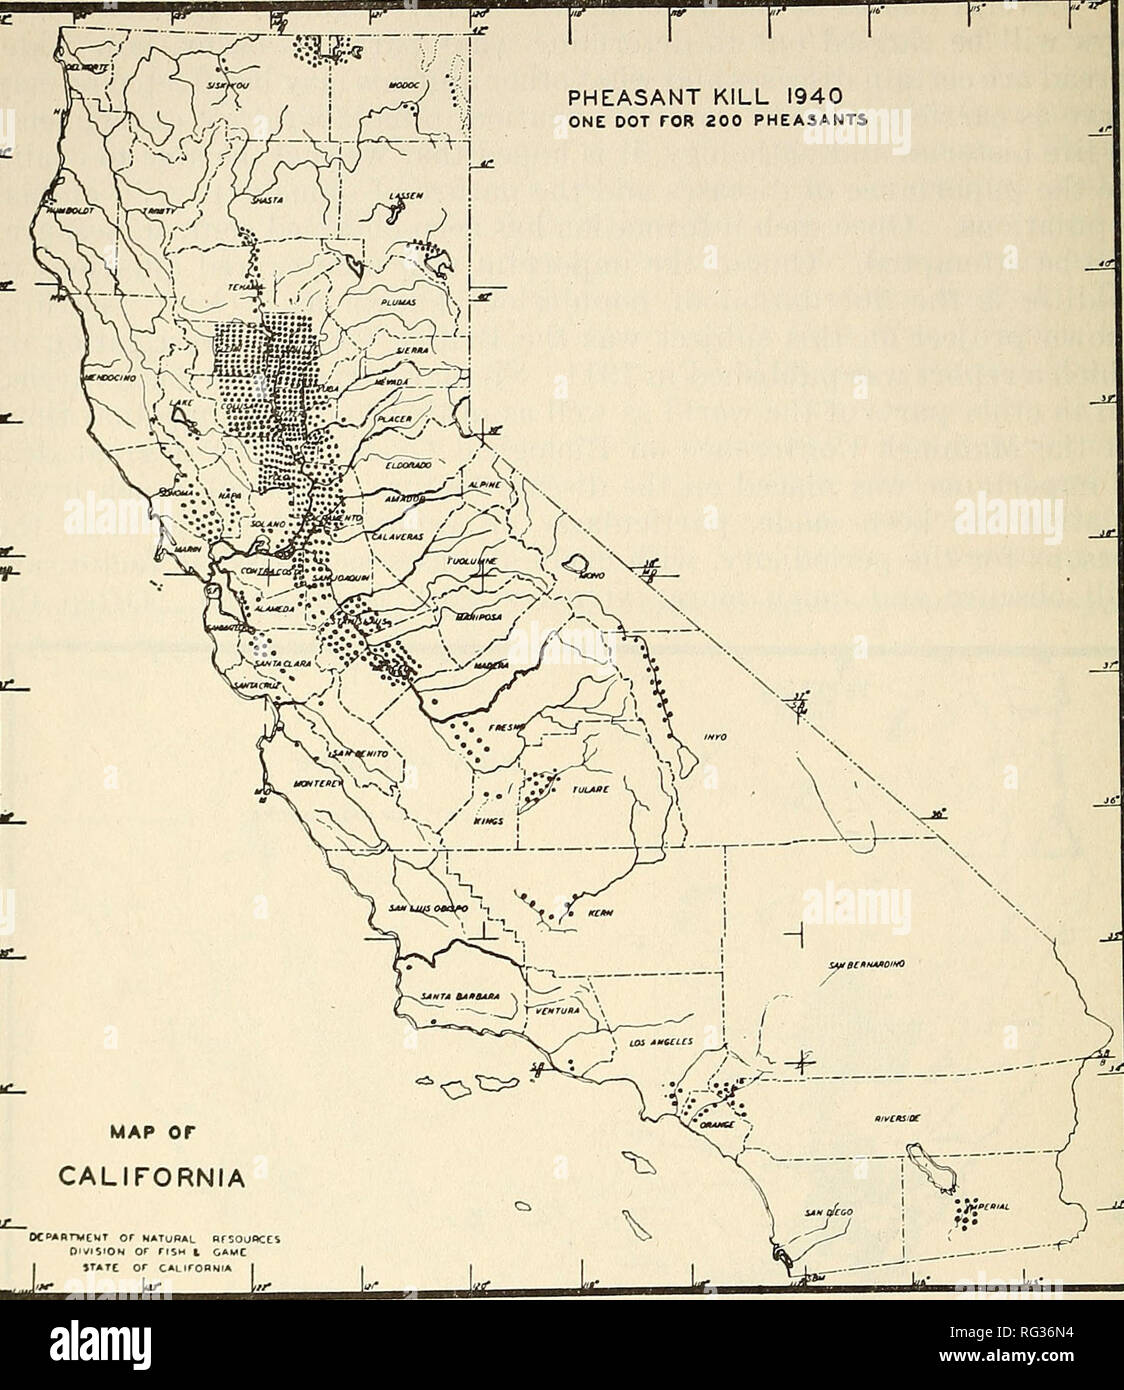 . California fish and game. Fisheries -- California; Game and game-birds -- California; Fishes -- California; Animal Population Groups; Pêches; Gibier; Poissons. 32 FISH AND GAME COMMISSION r PHEASANT KILL 1940 ONE DOT FOR 200 PHEASANTS. MAP or CALIFORNIA OC^nruzur or natural HfSOuflCES DwiSrON or riSM t camc I STATC or CALirOHMW Jti. Fig. evaluation of certain diseases of wildlife has been based on the findings in similar domestic species but we are finding, as in the case of coccidiosis in valley quail, that the picture may be vastly different in many respects and therefore requires a differ Stock Photo